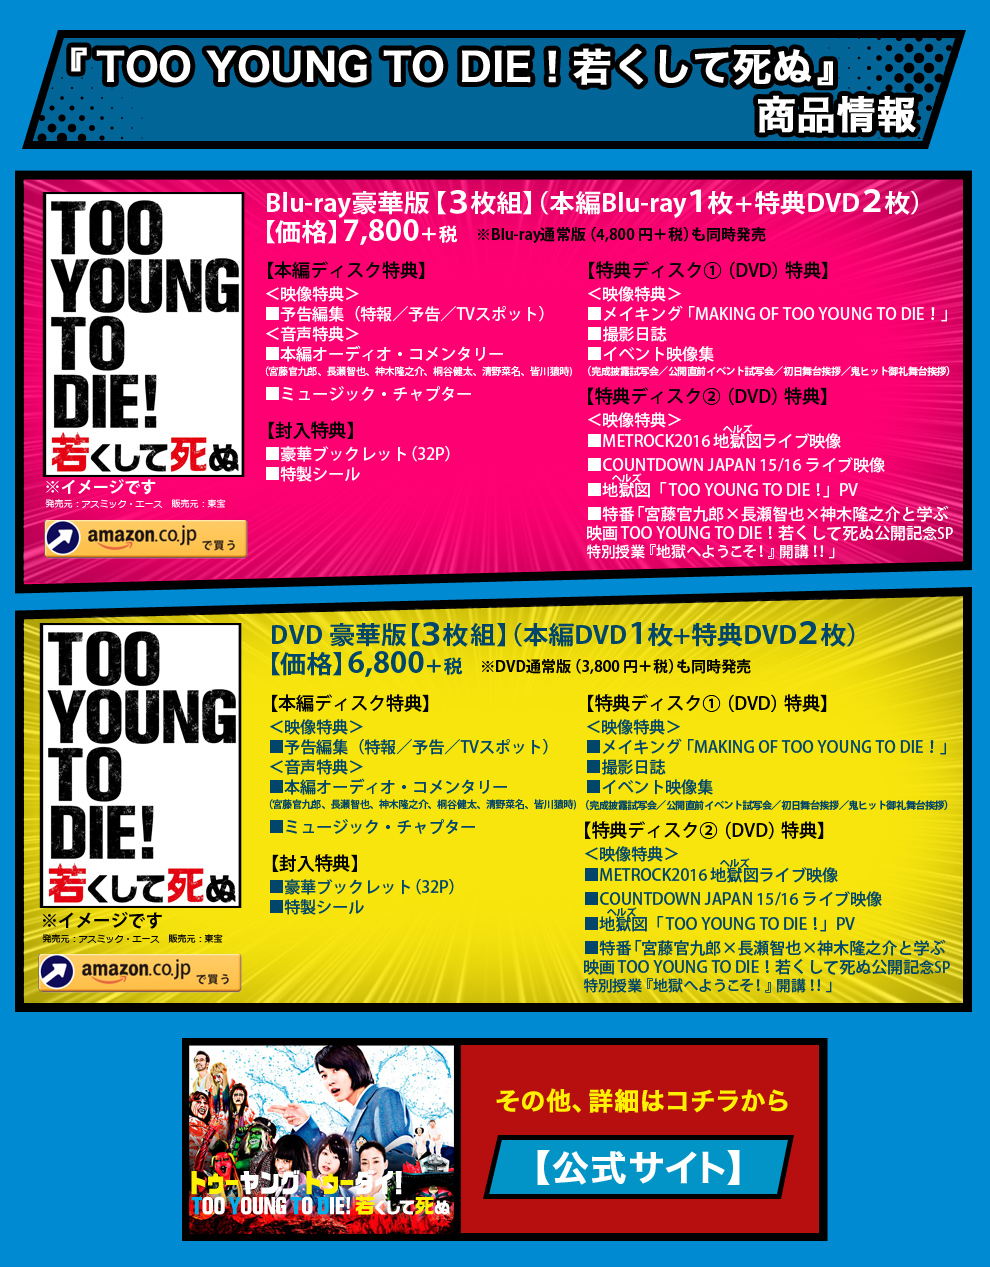 『TOO YOUNG TO DIE！若くして死ぬ』商品情報